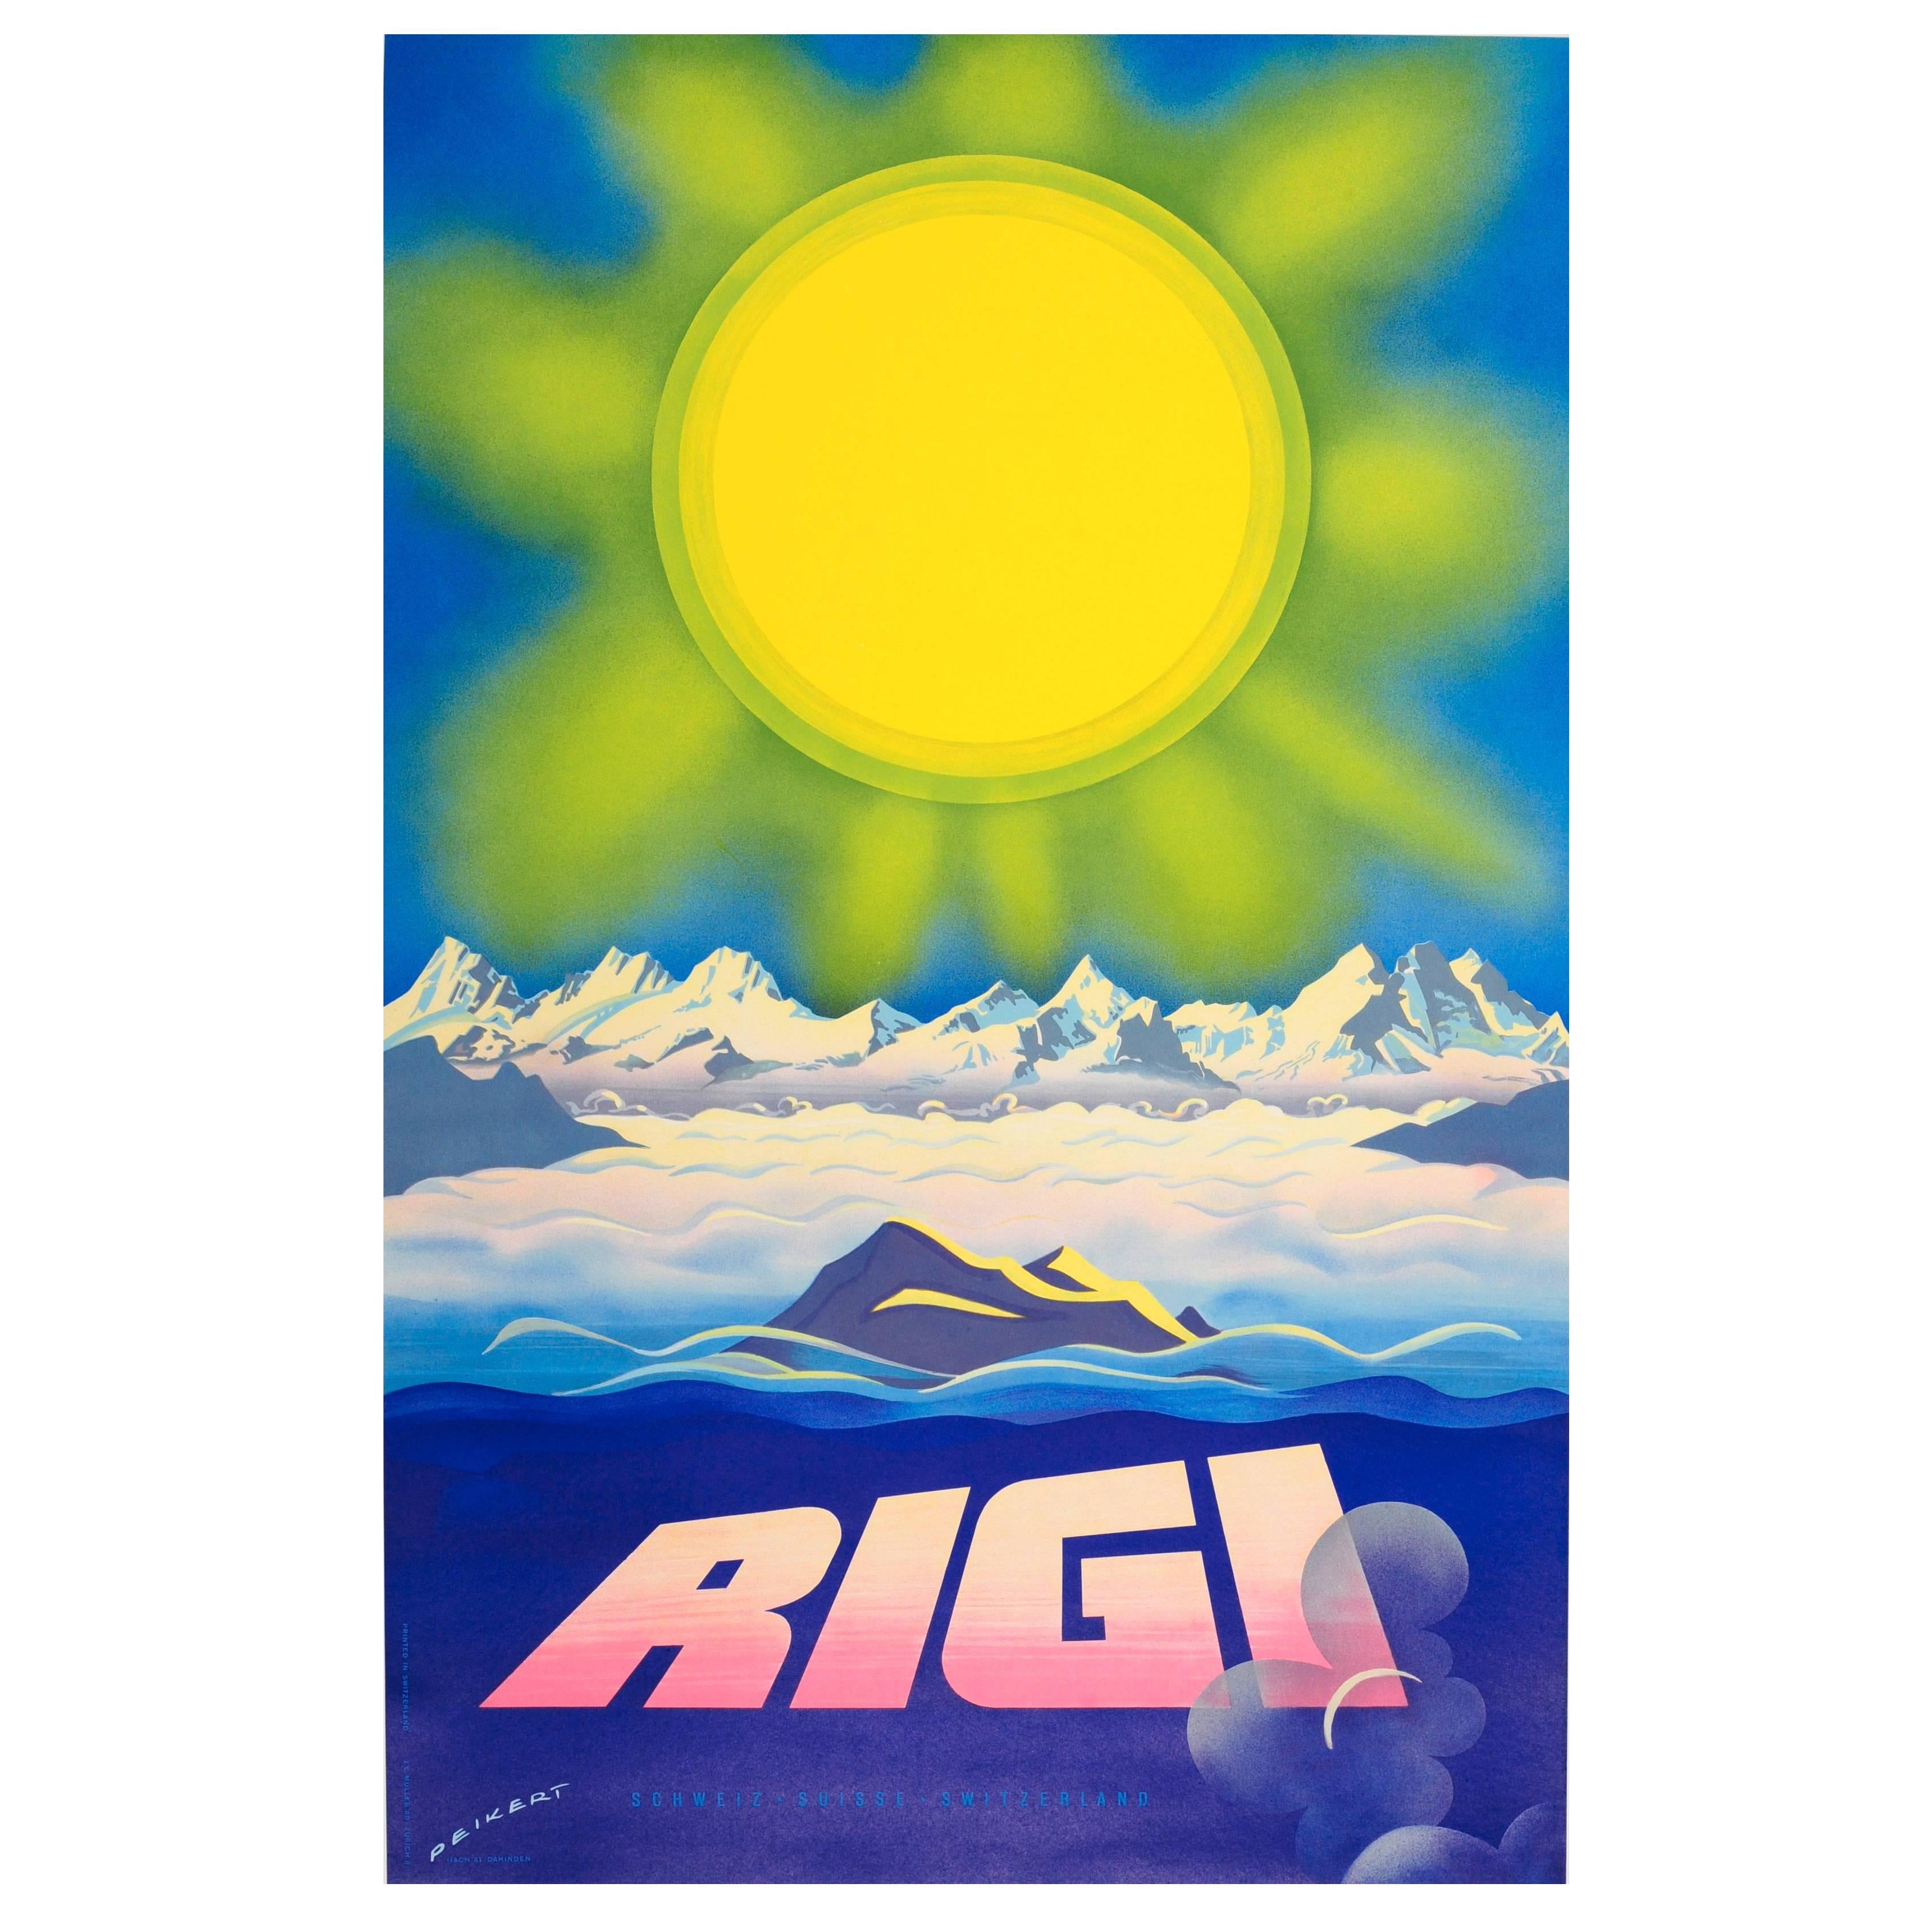 Original Vintage Travel Poster Advertising Rigi - Mountains in the Swiss Alps For Sale